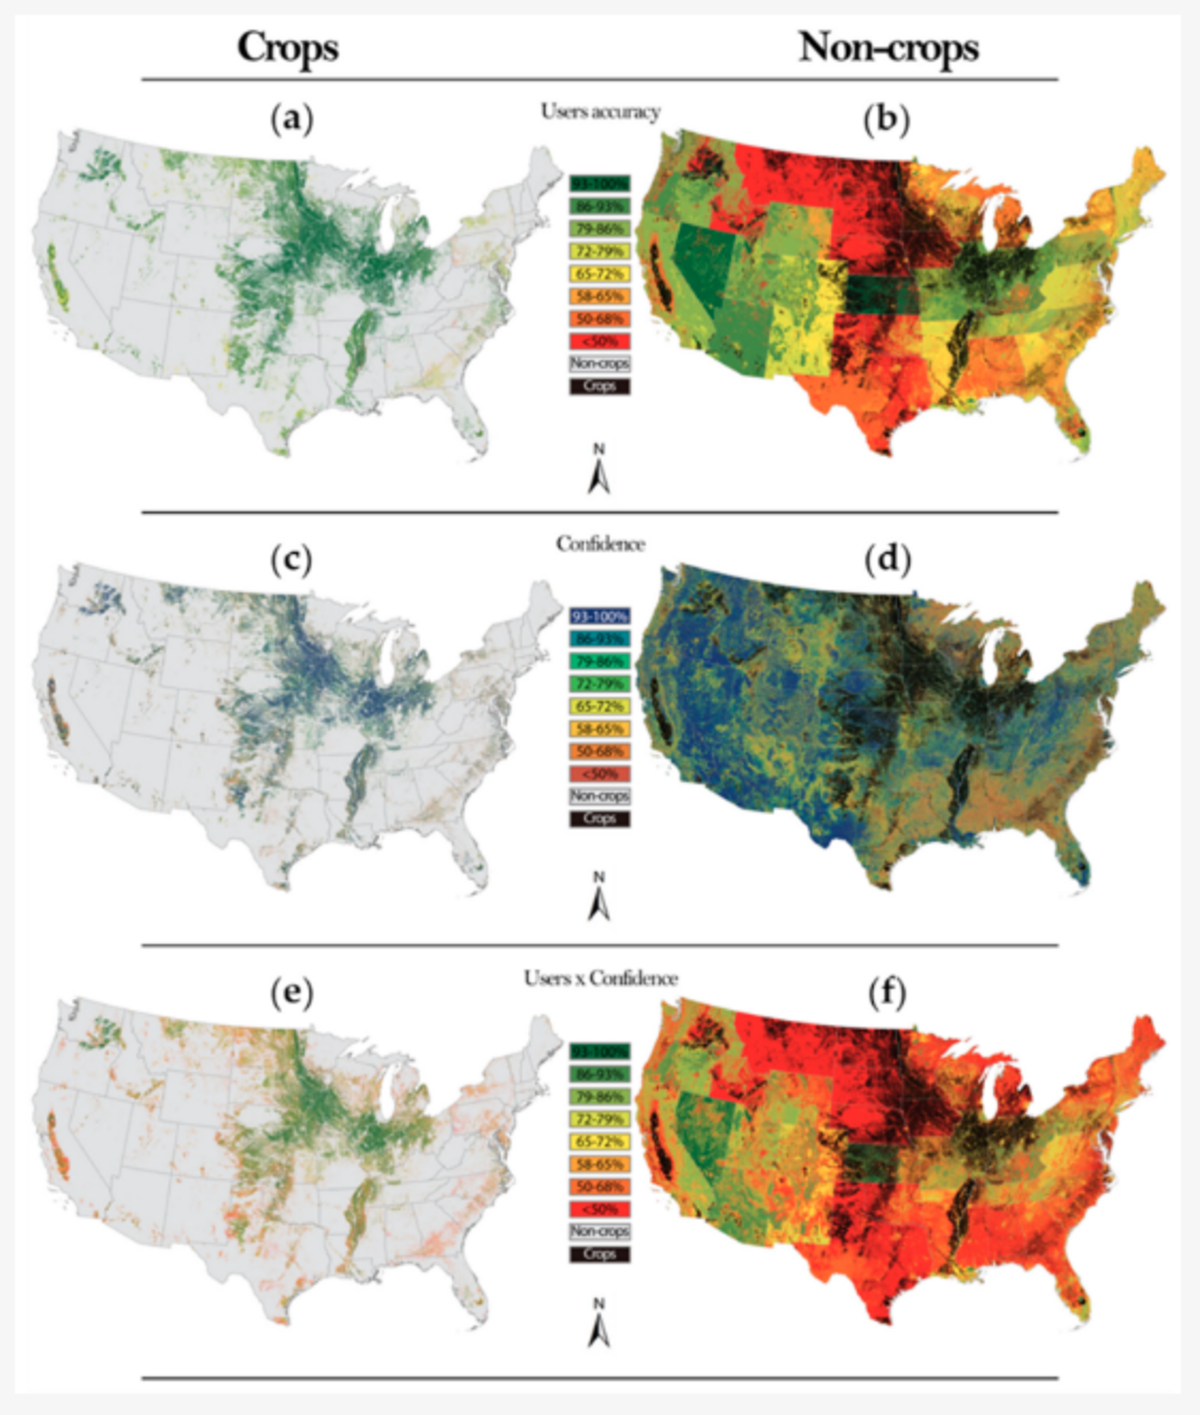 Accuracy Bias And Improvements In Mapping Crops And Cropland Across